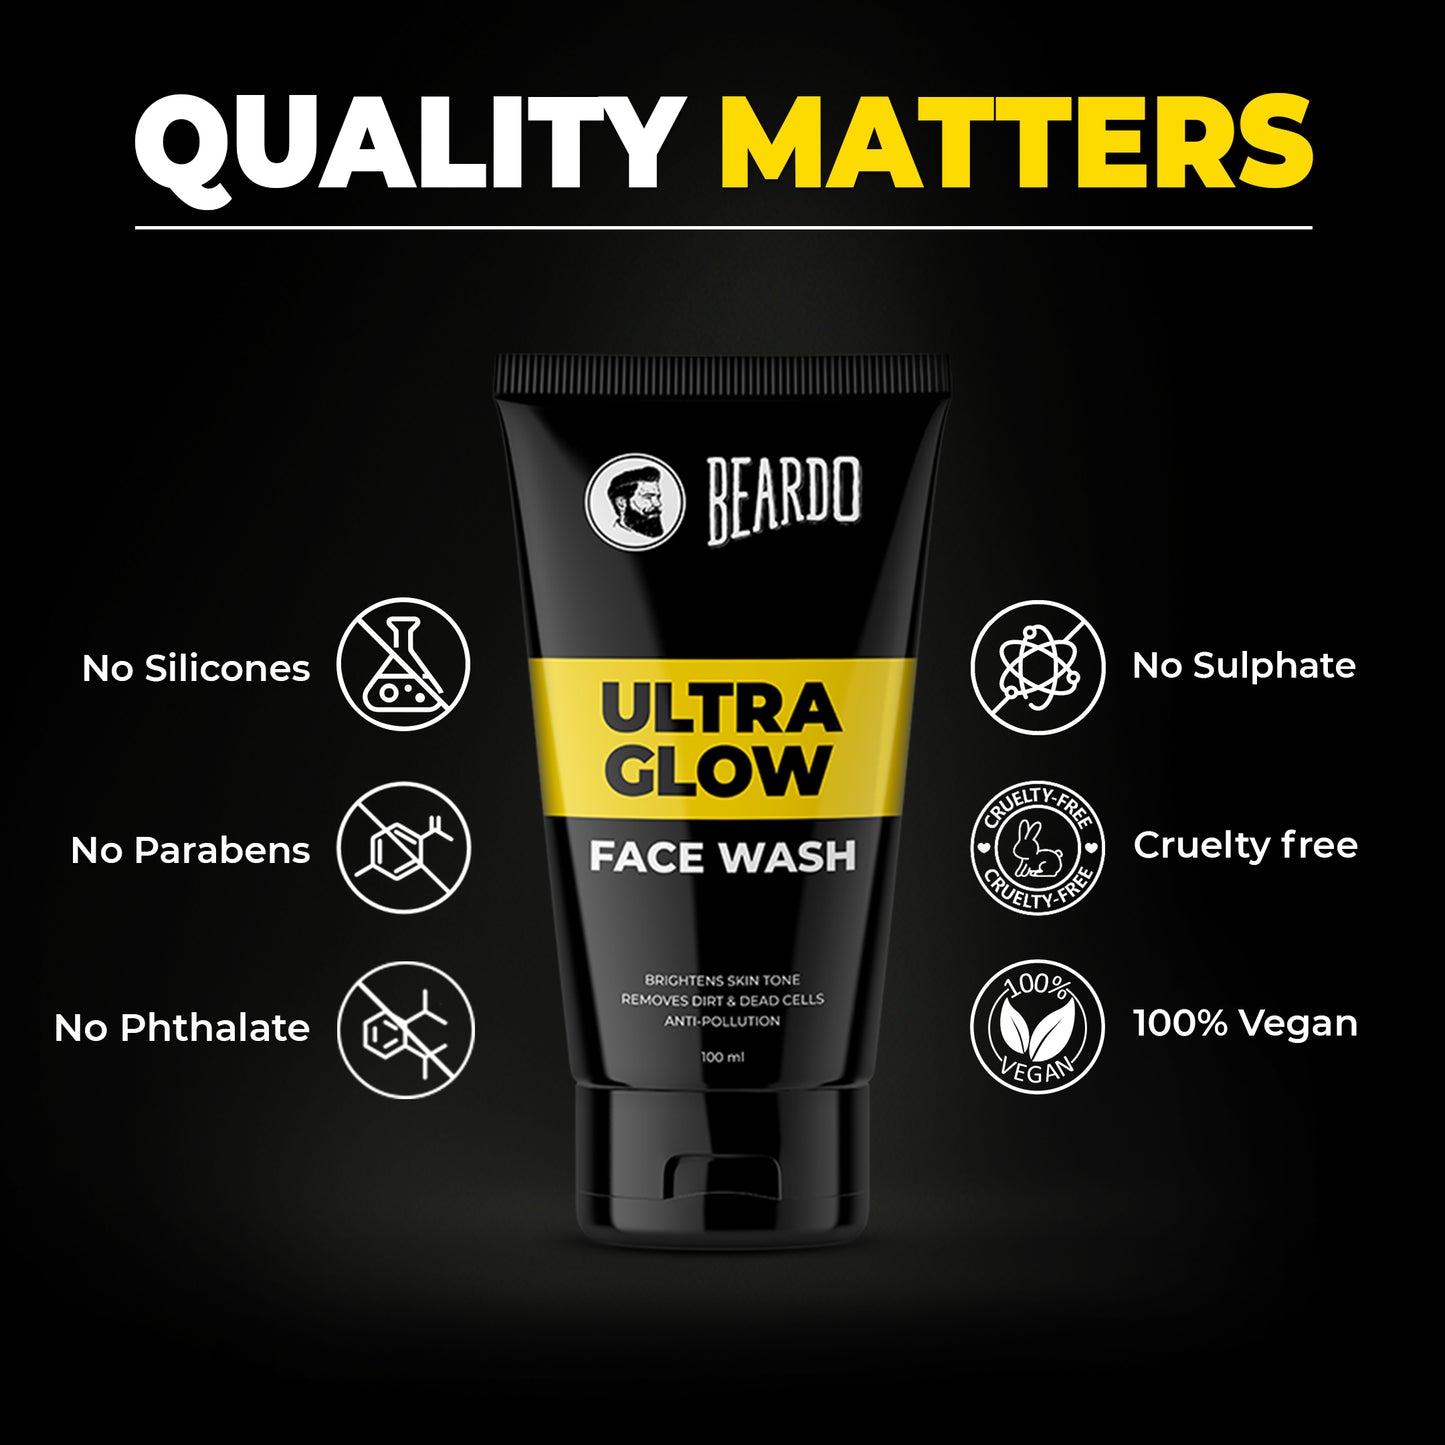 quality matters, 100% vegan, cruelty free, silicone free